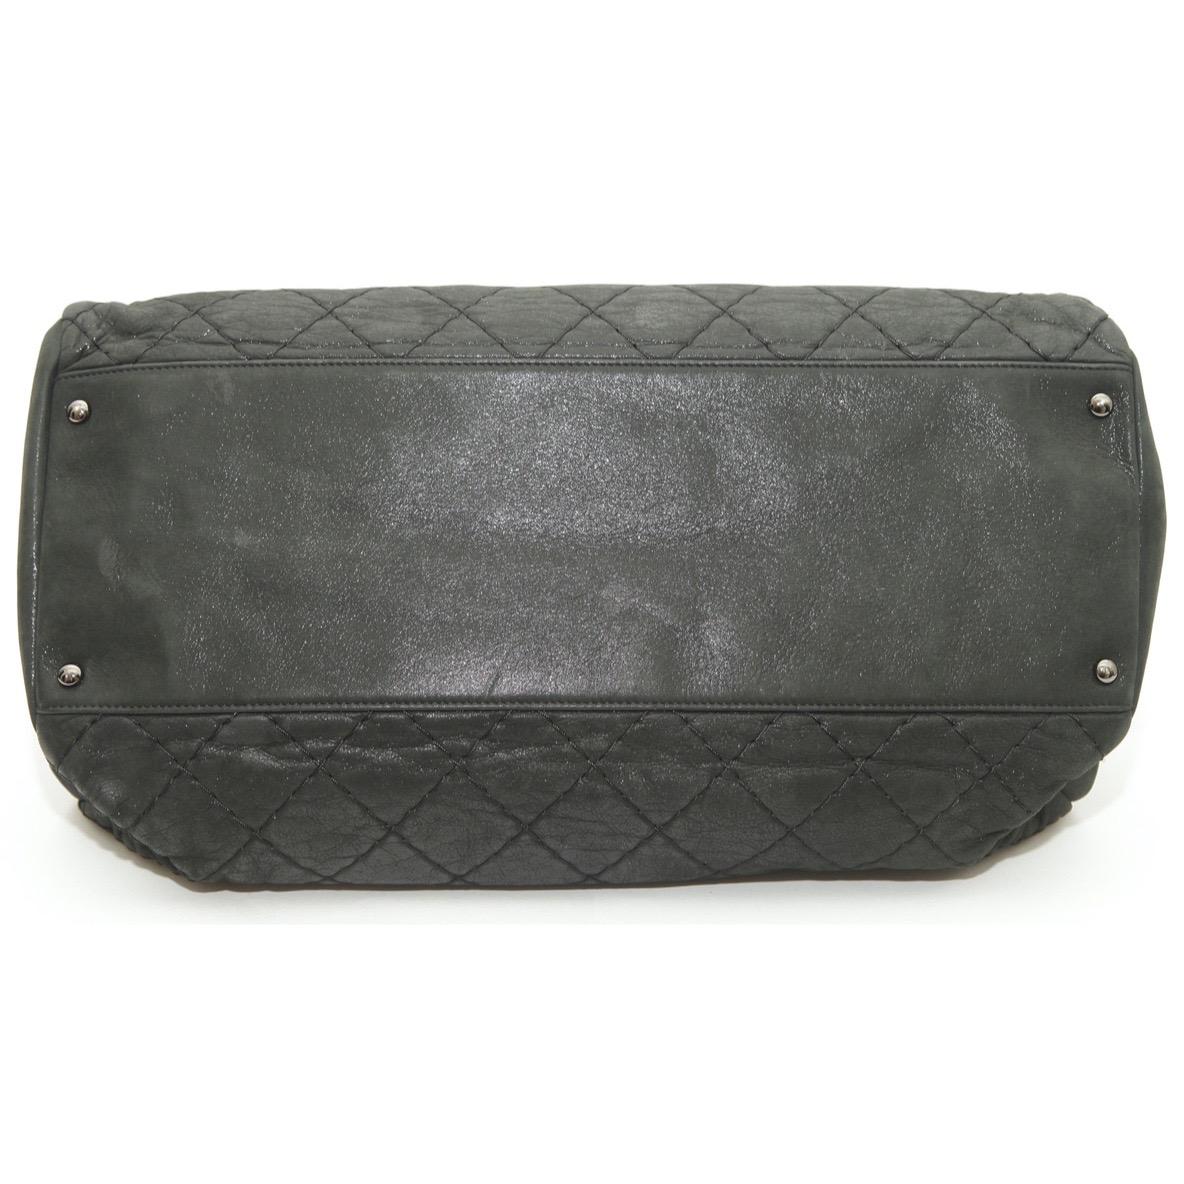 Women's CHANEL Black Shoulder Bag Bowling JUST MADEMOISELLE Quilted Iridescent Chain For Sale